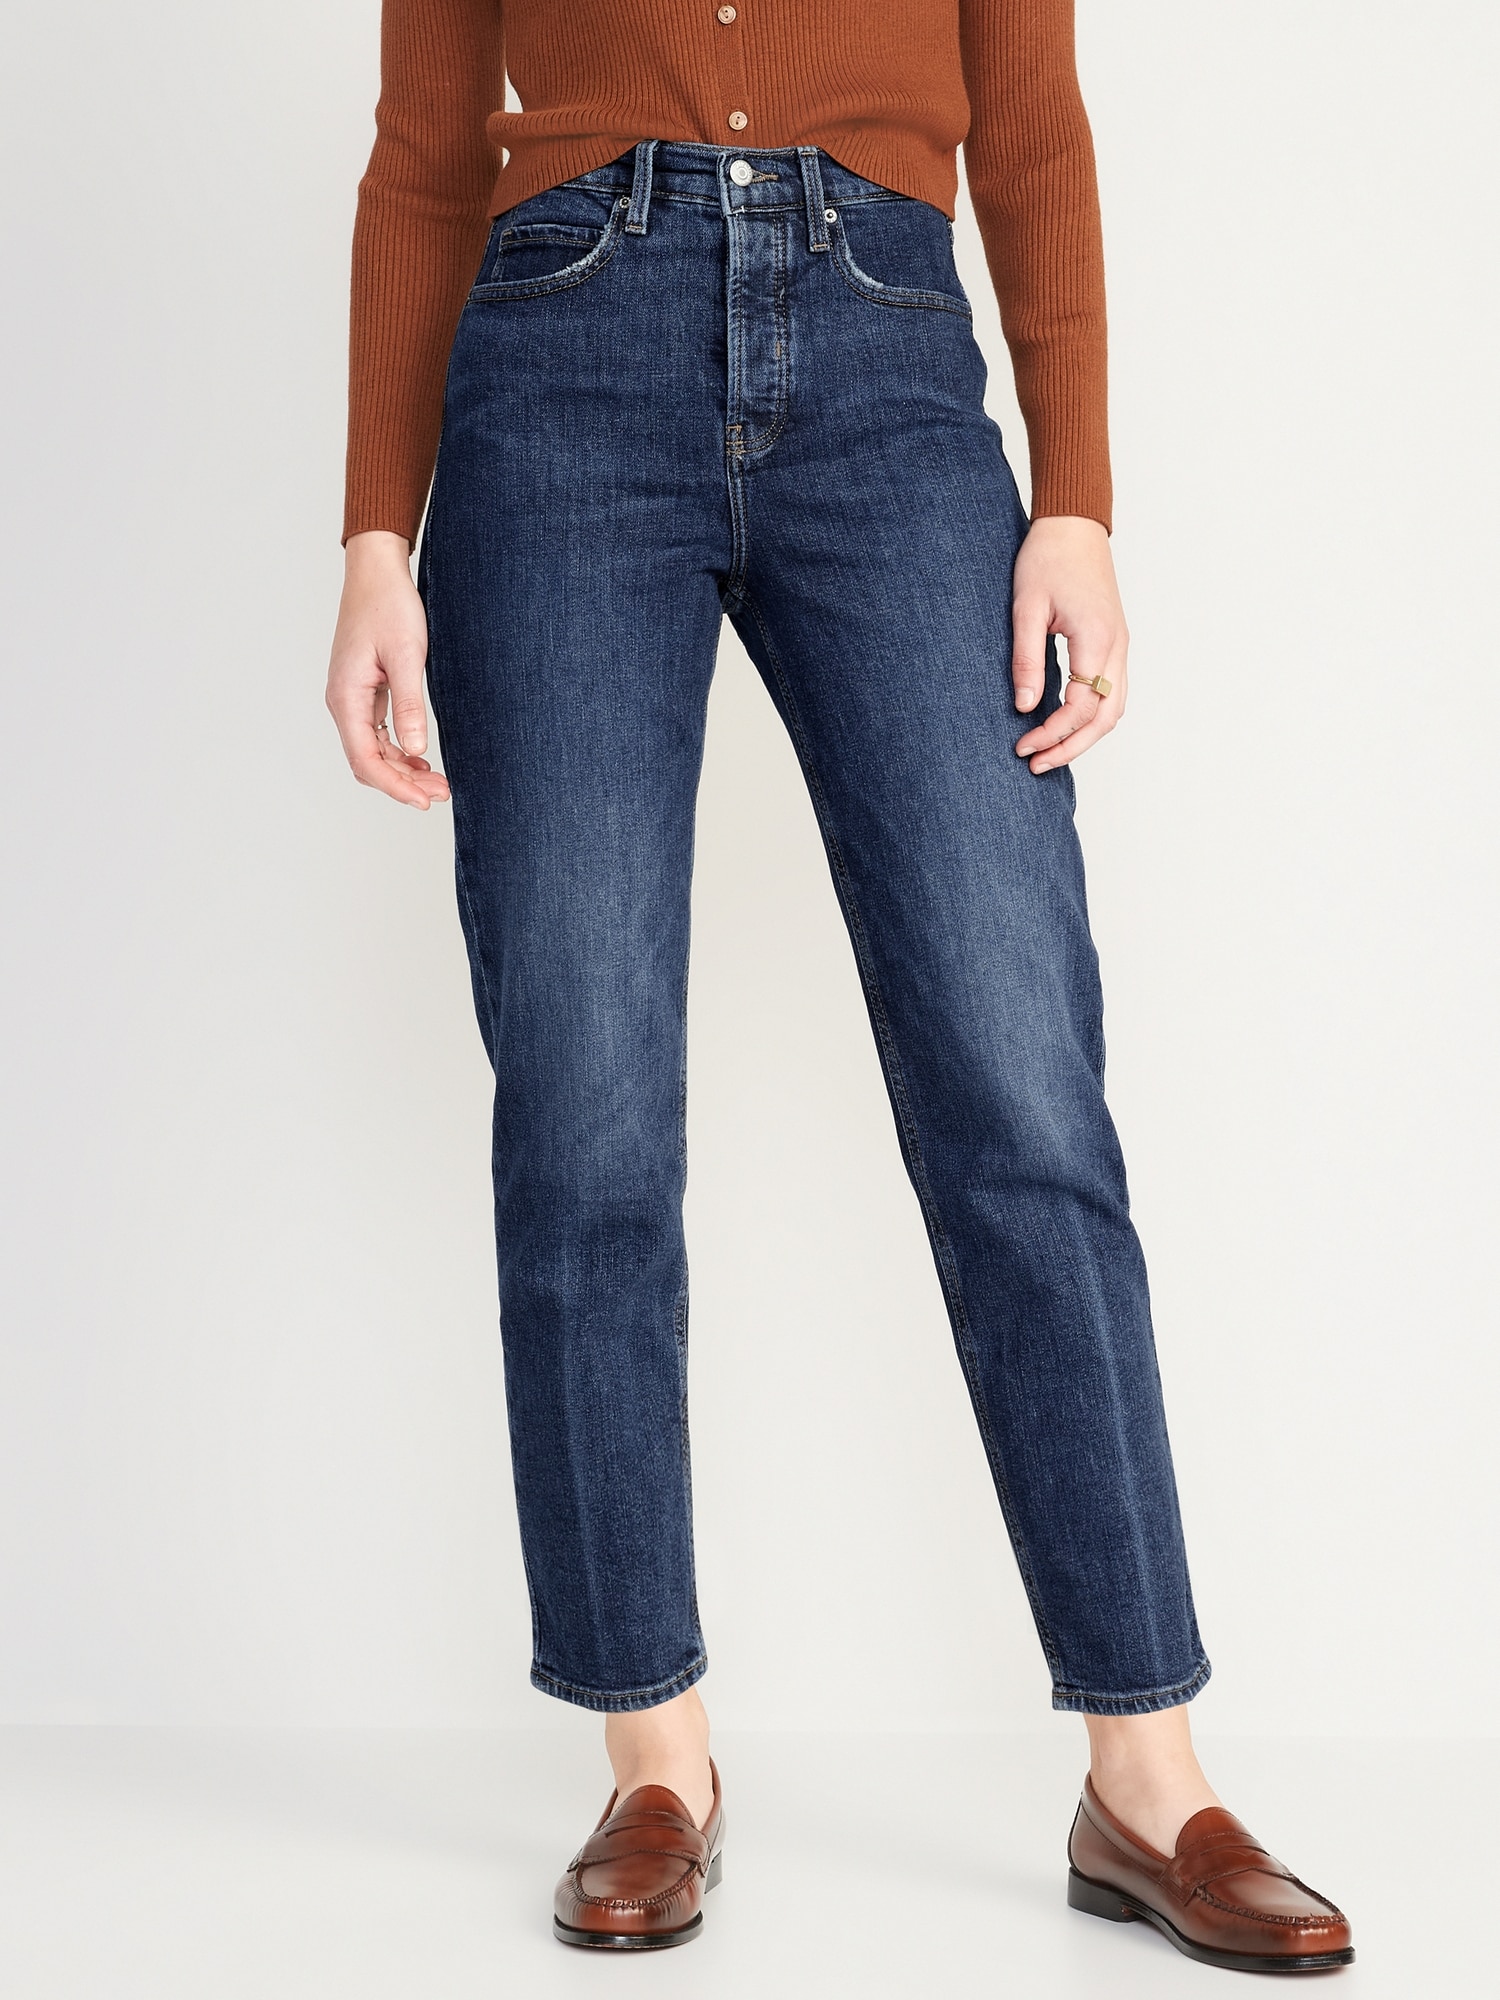 Old Navy Women's High-Waisted OG Straight Button-Fly Extra-Stretch Jeans - Blue - Plus Size 30